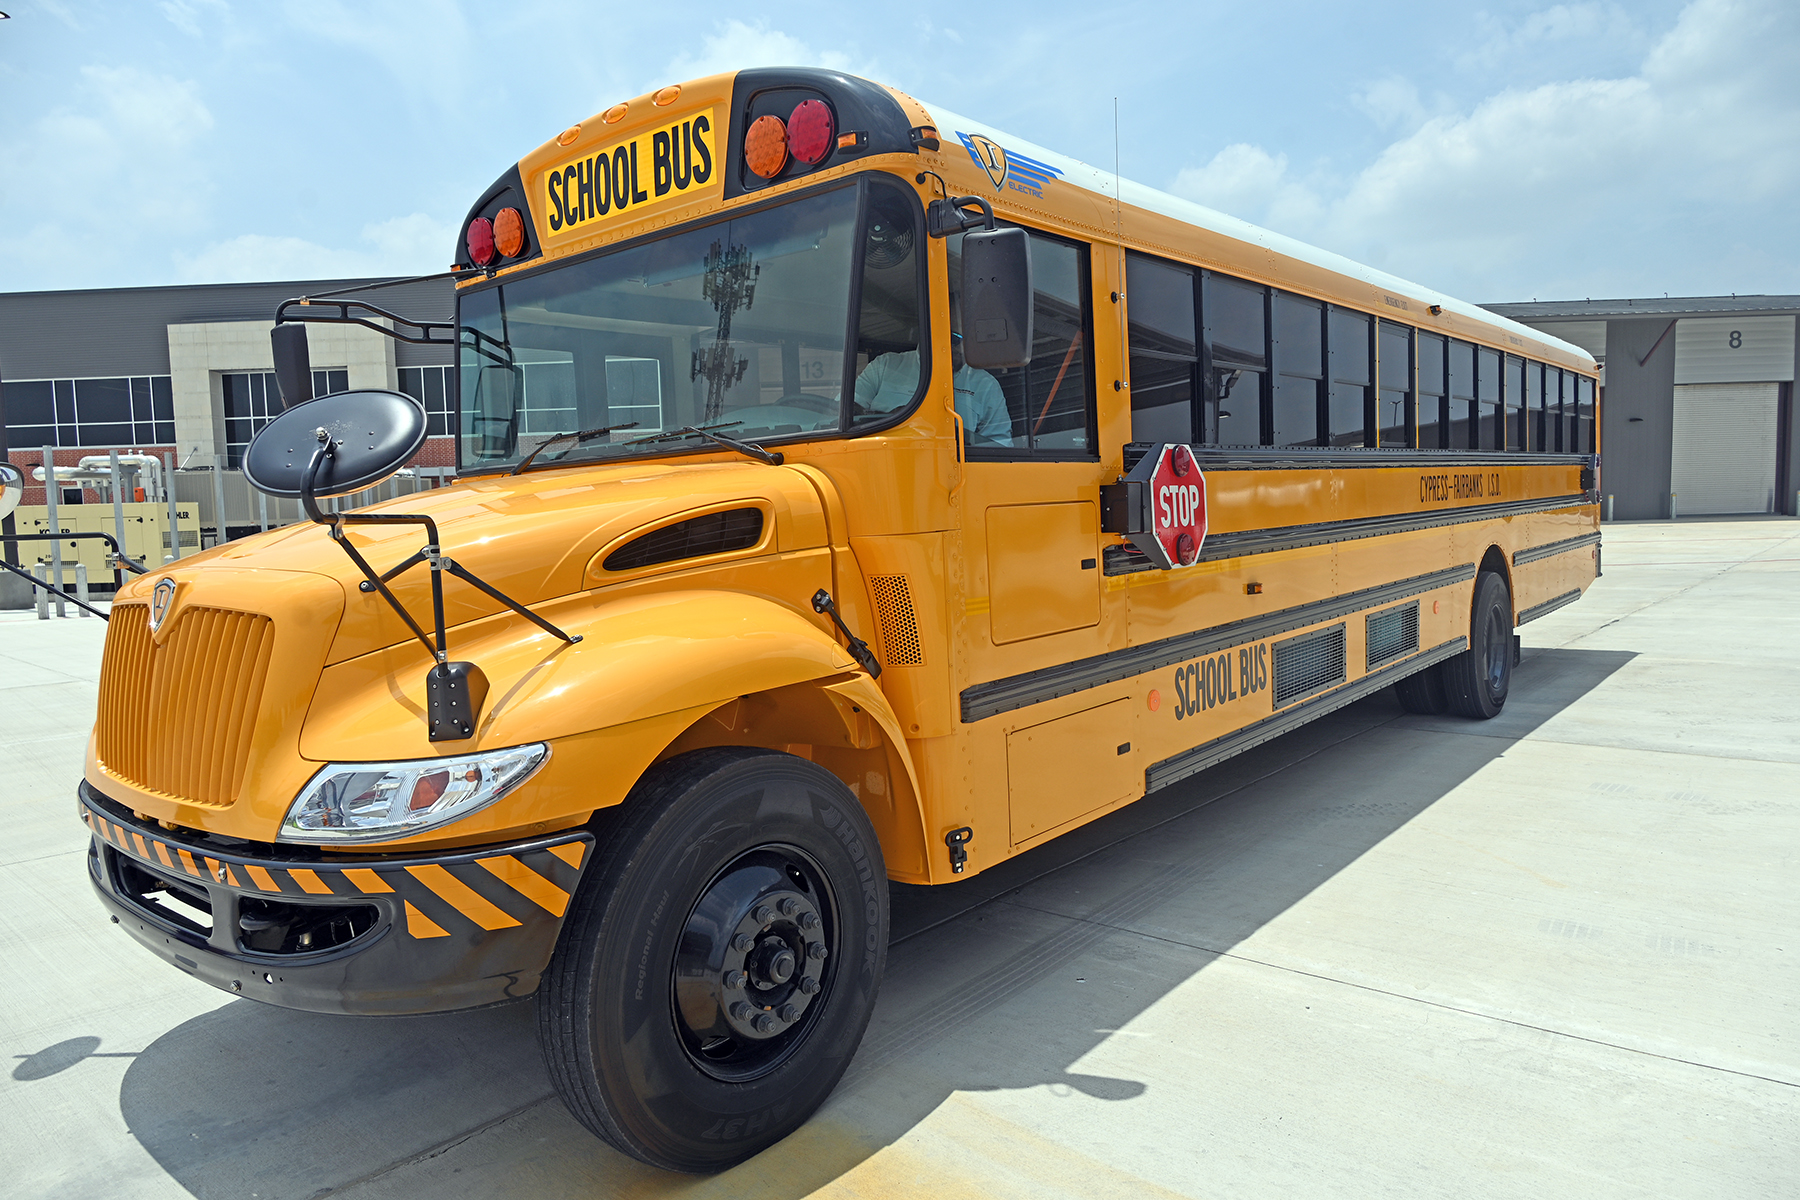 New CFISD Electric Buses Provide Environmental, Cost BenefitsÂ 